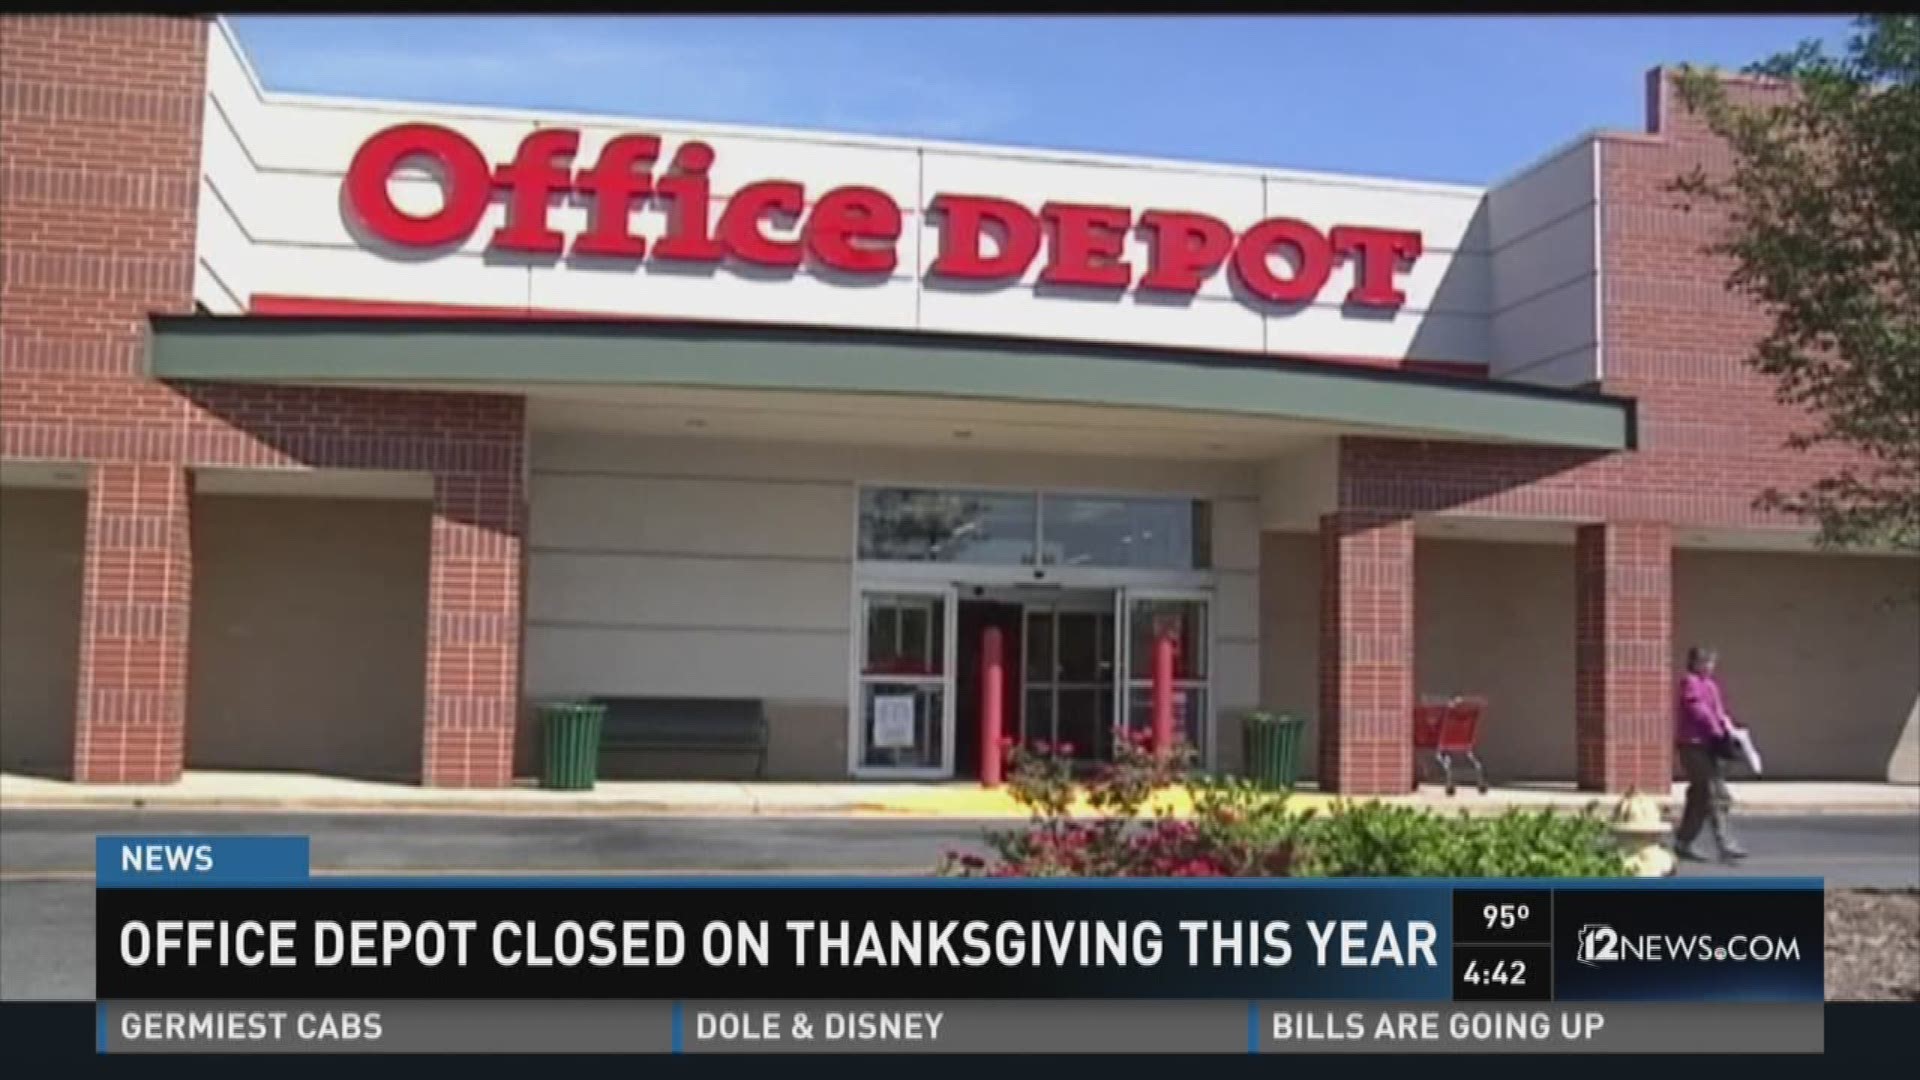 Add this store to the list of retailers not open on Thanksgiving Day.